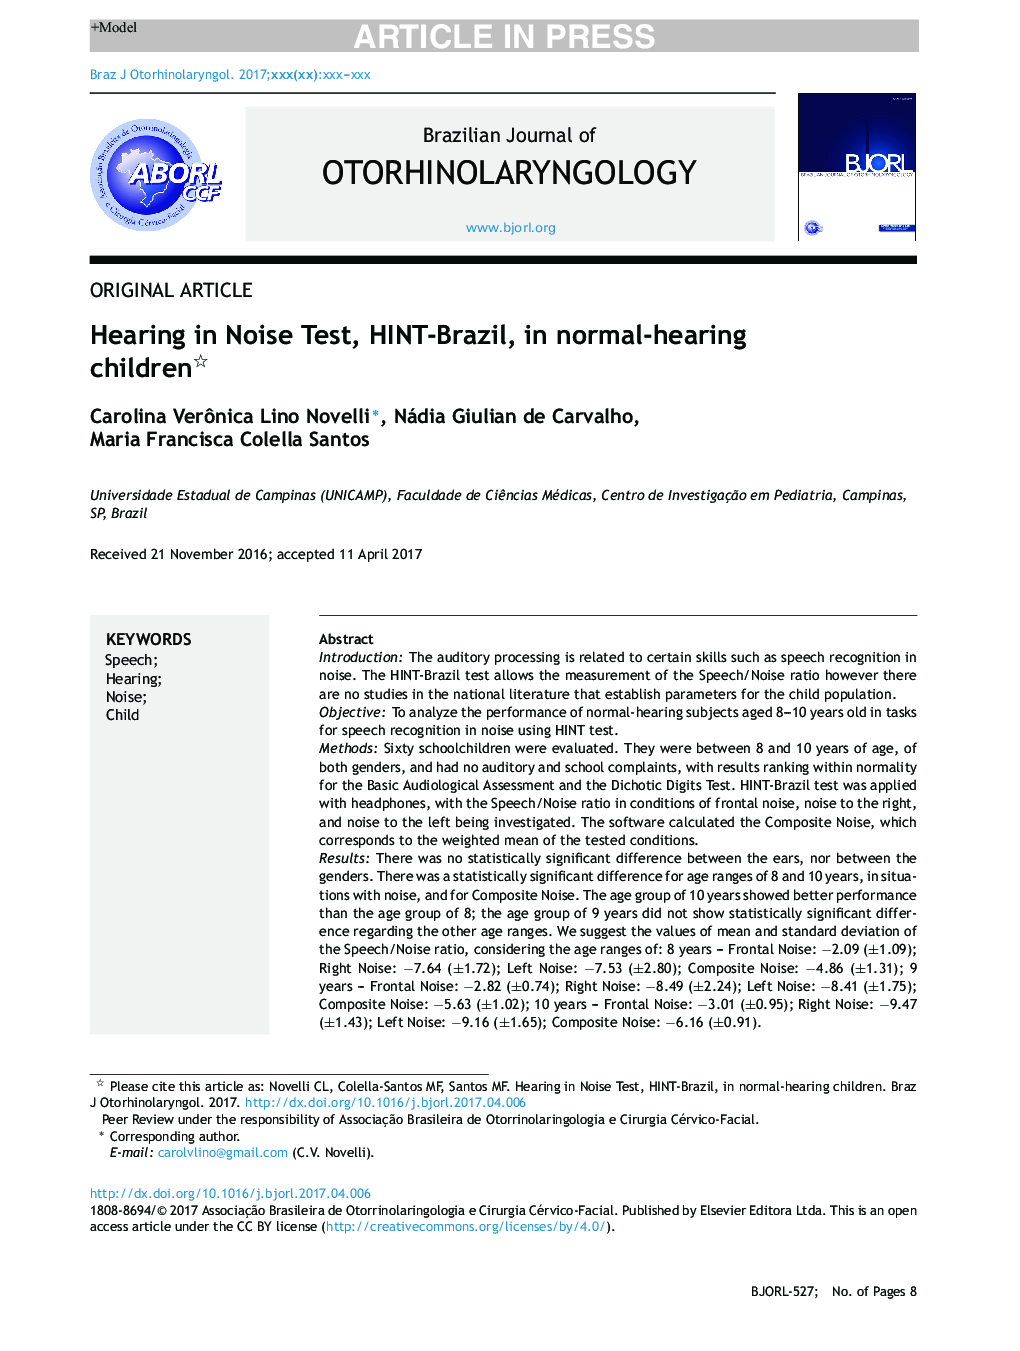 Hearing in Noise Test, HINT-Brazil, in normal-hearing children